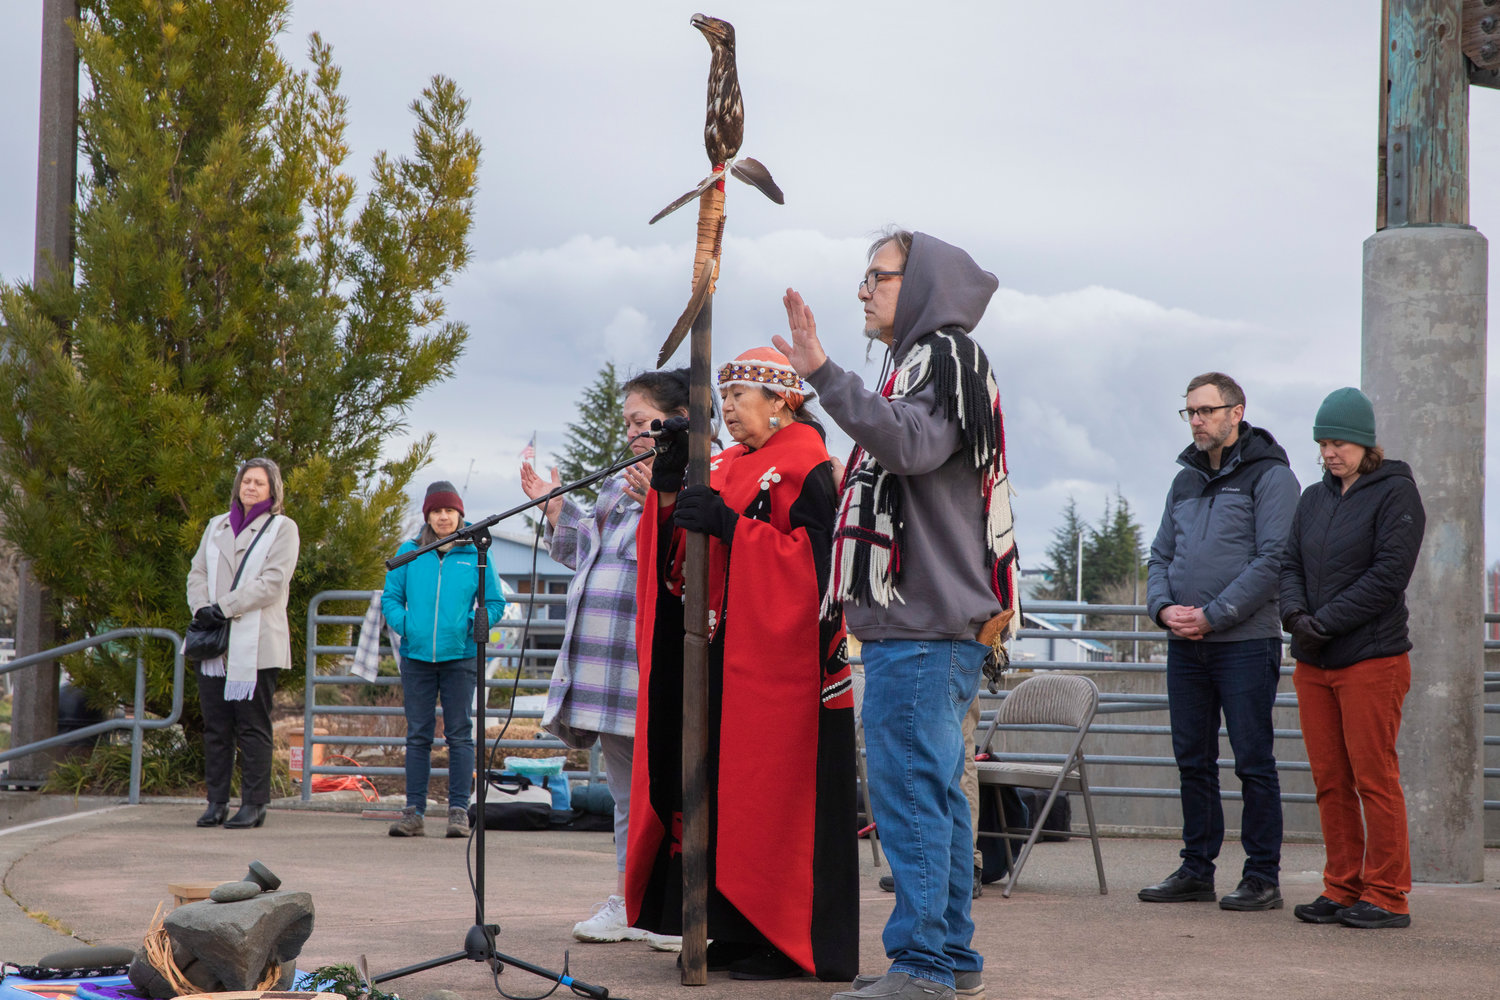 Lisa Johns, of the Squaxin Island Tribe, Mary Leitka, a Hoh Tribal member who works for Nisqually Emergency Management and Freddie Lane of the Lummi Tribal Nation pray with attendees while holding a ritual object, featuring the head of an eagle, at an event hosted by Interfaith Works of Thurston County on Wednesday in Olympia.